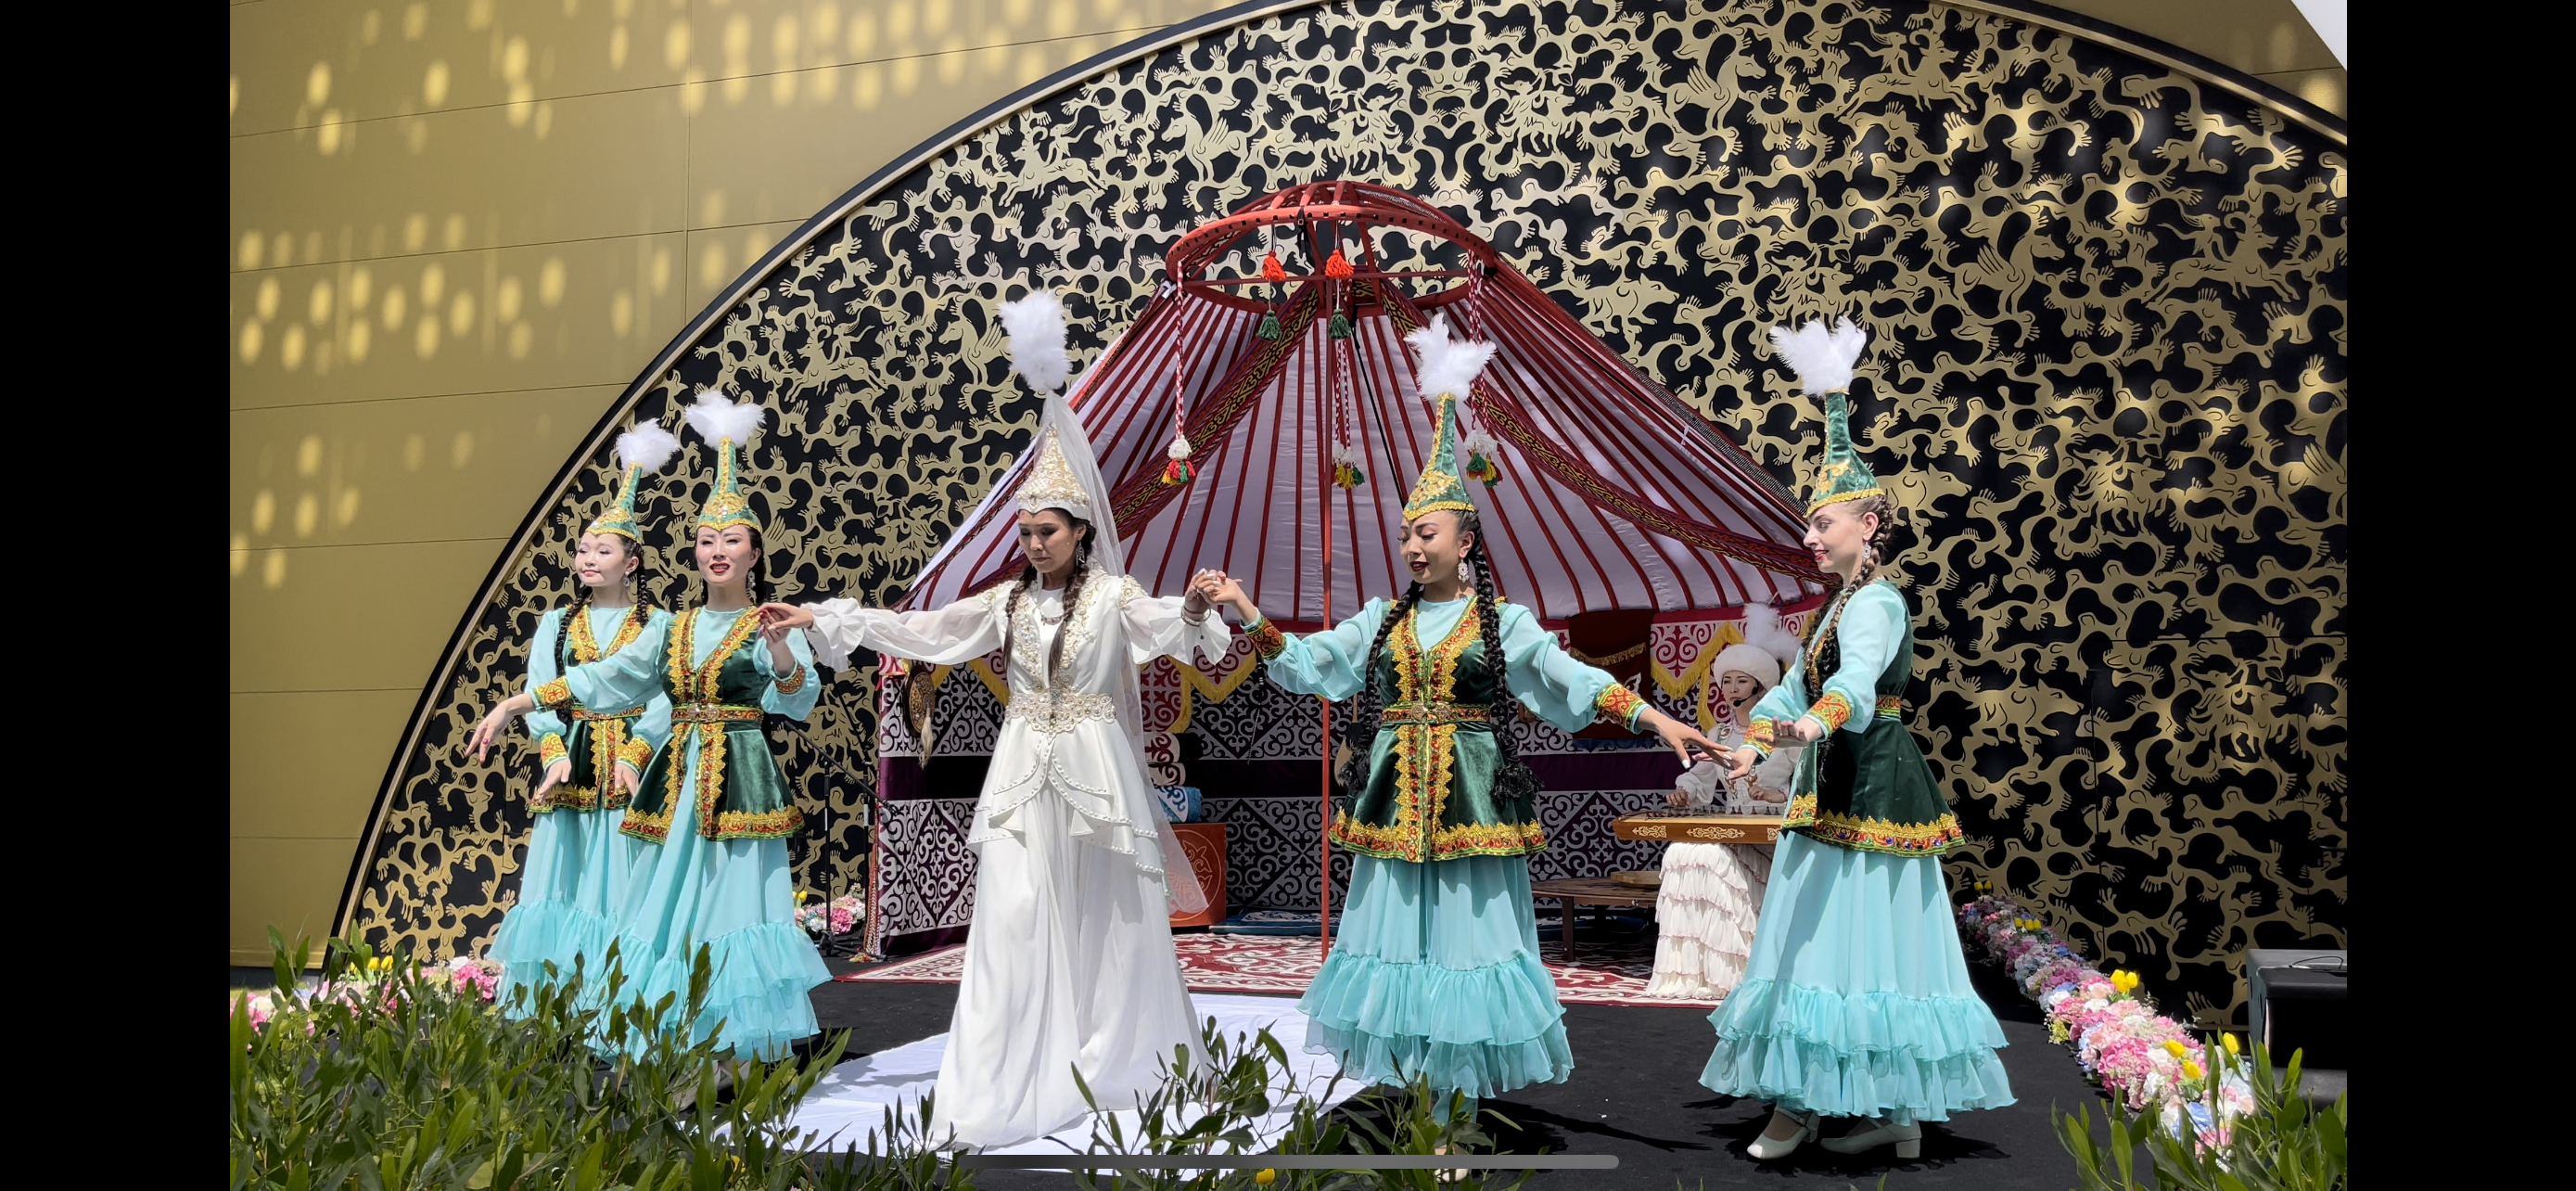 Cultural Events within the framework of the celebration of Nauryz Meiramy were held World Exhibition EXPO-2020 Dubai